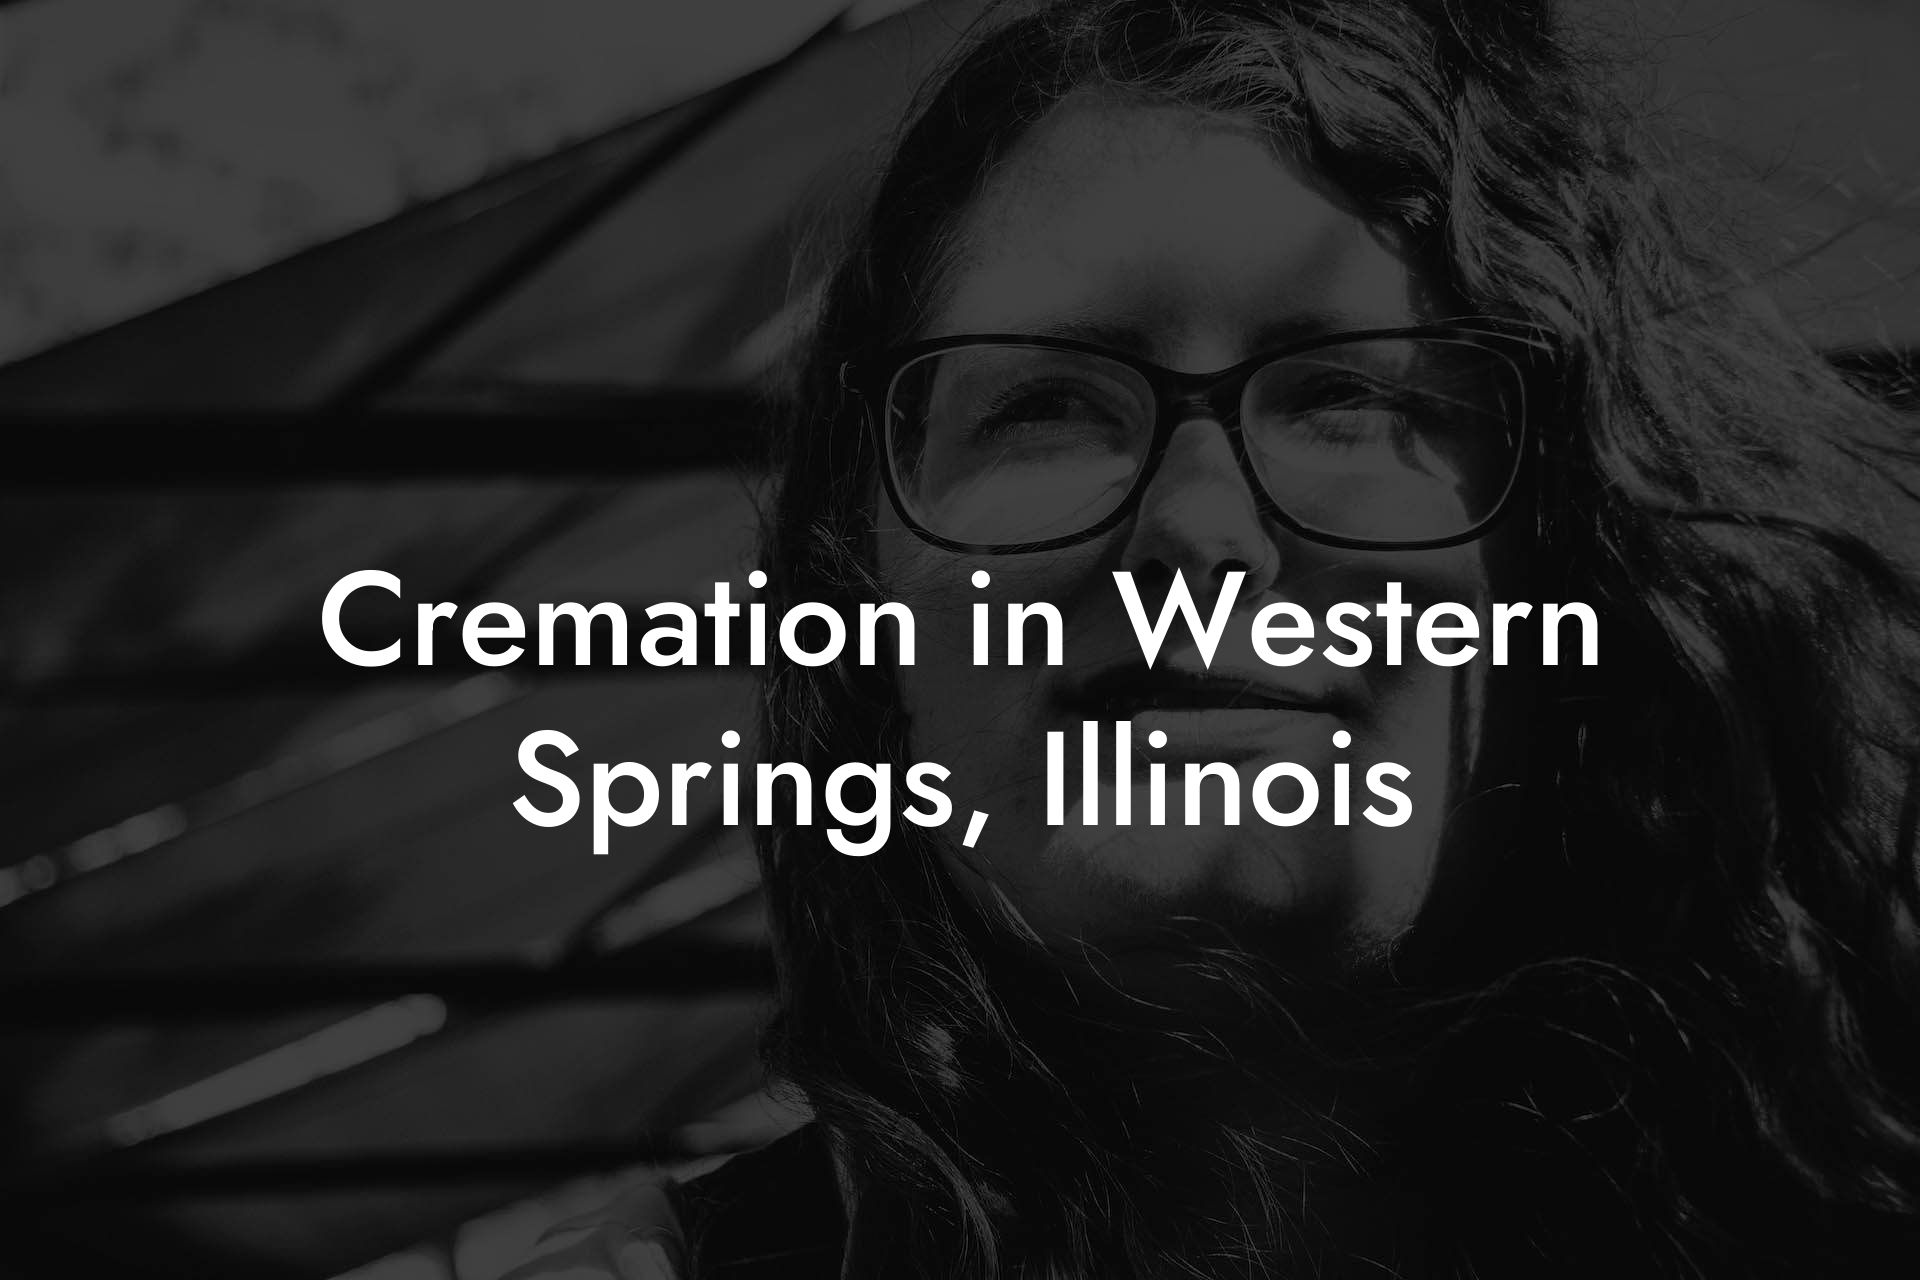 Cremation in Western Springs, Illinois